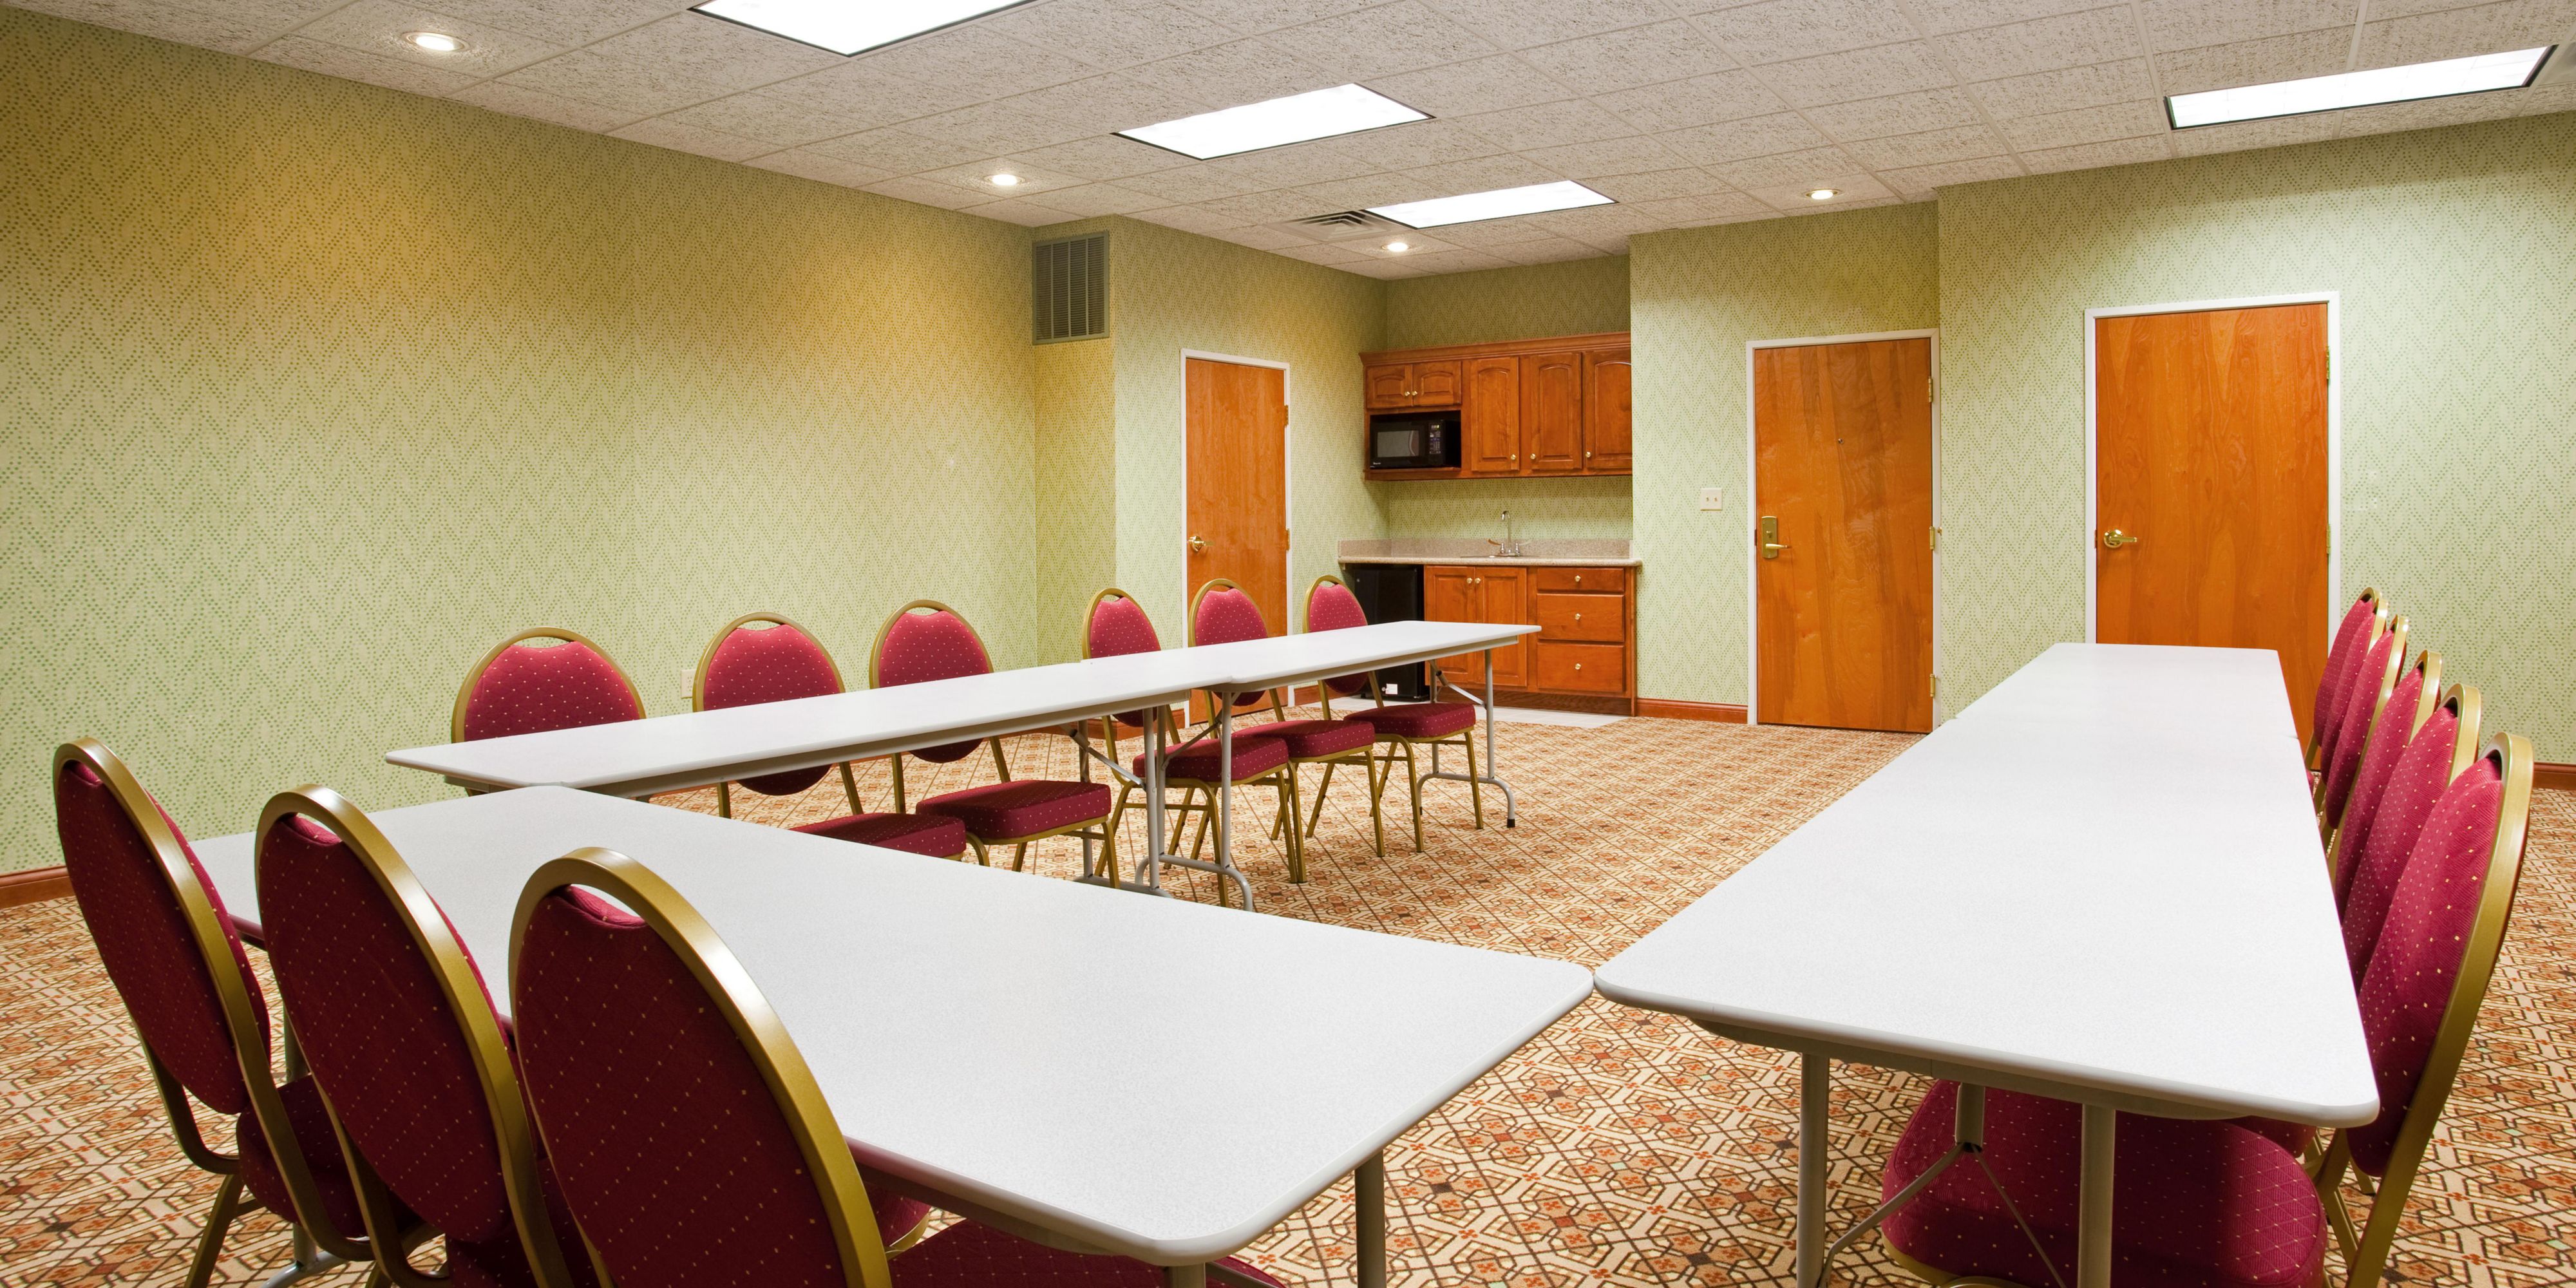 Our 32 person meeting room is perfect for your corporate training programs, including a kitchenette with small fridge and a microwave and a fully up to date business center nearby.